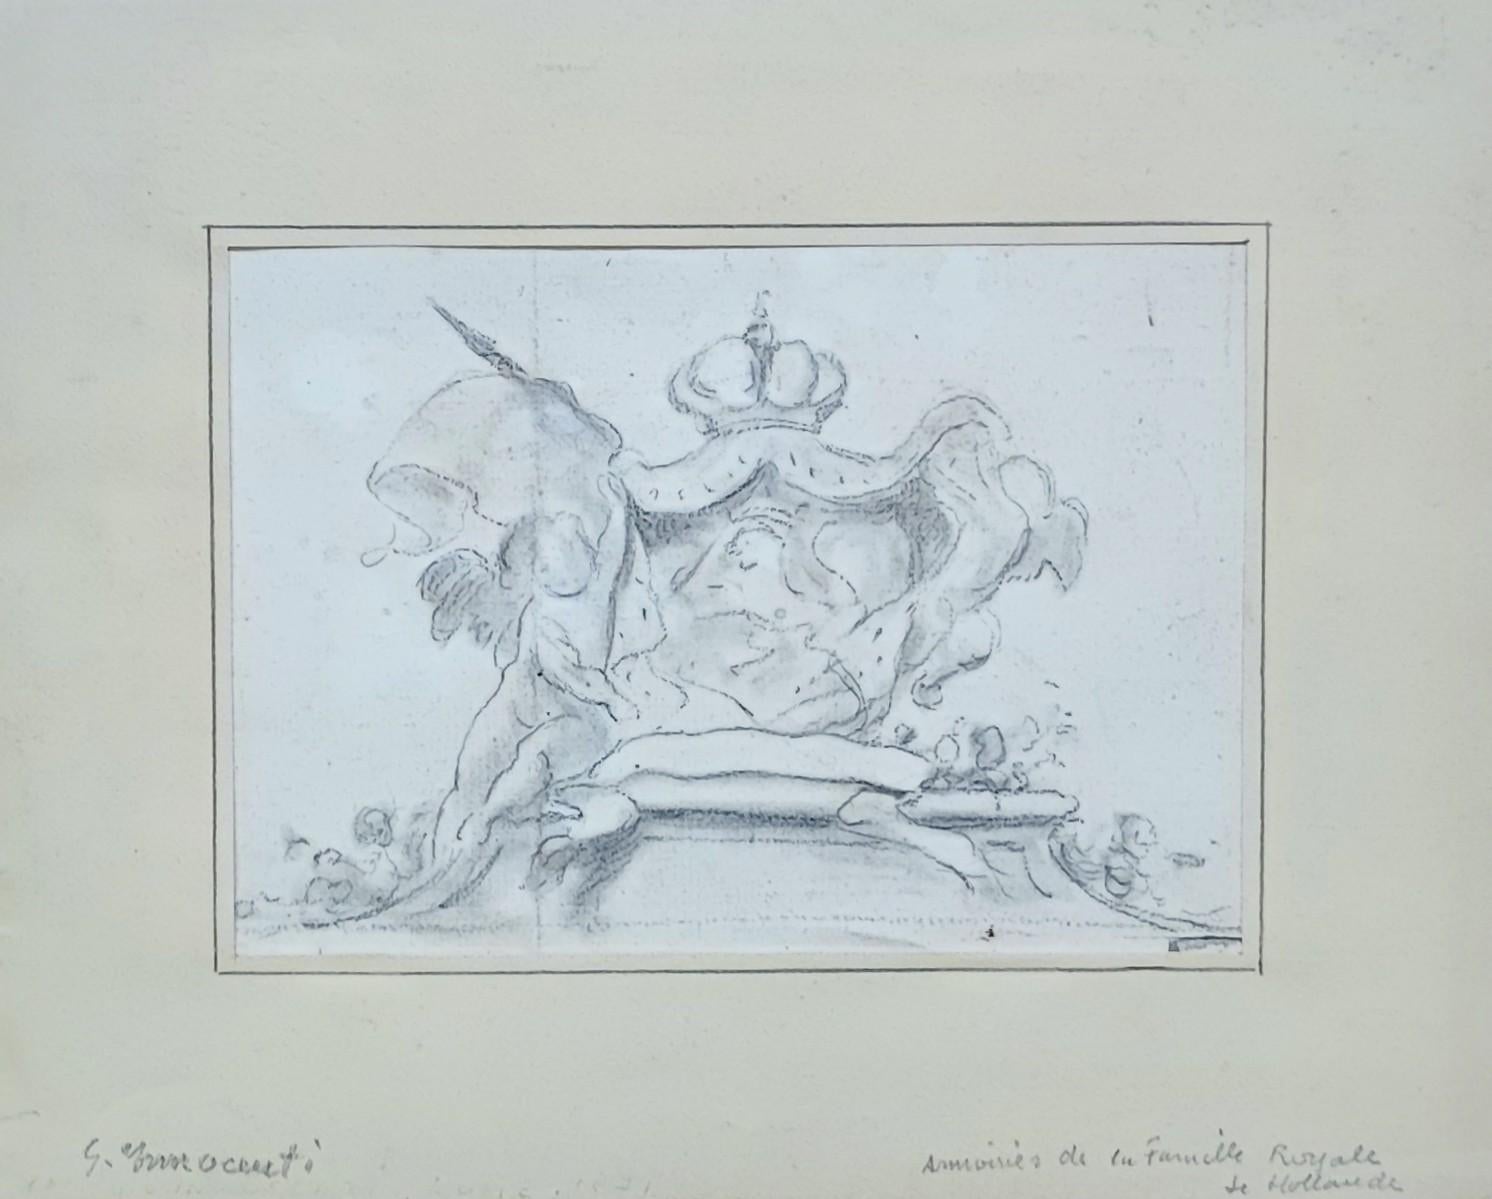 Guglielmo Innocenti Figurative Art - Sketch Coat of Arms of the Royal Family of Holland